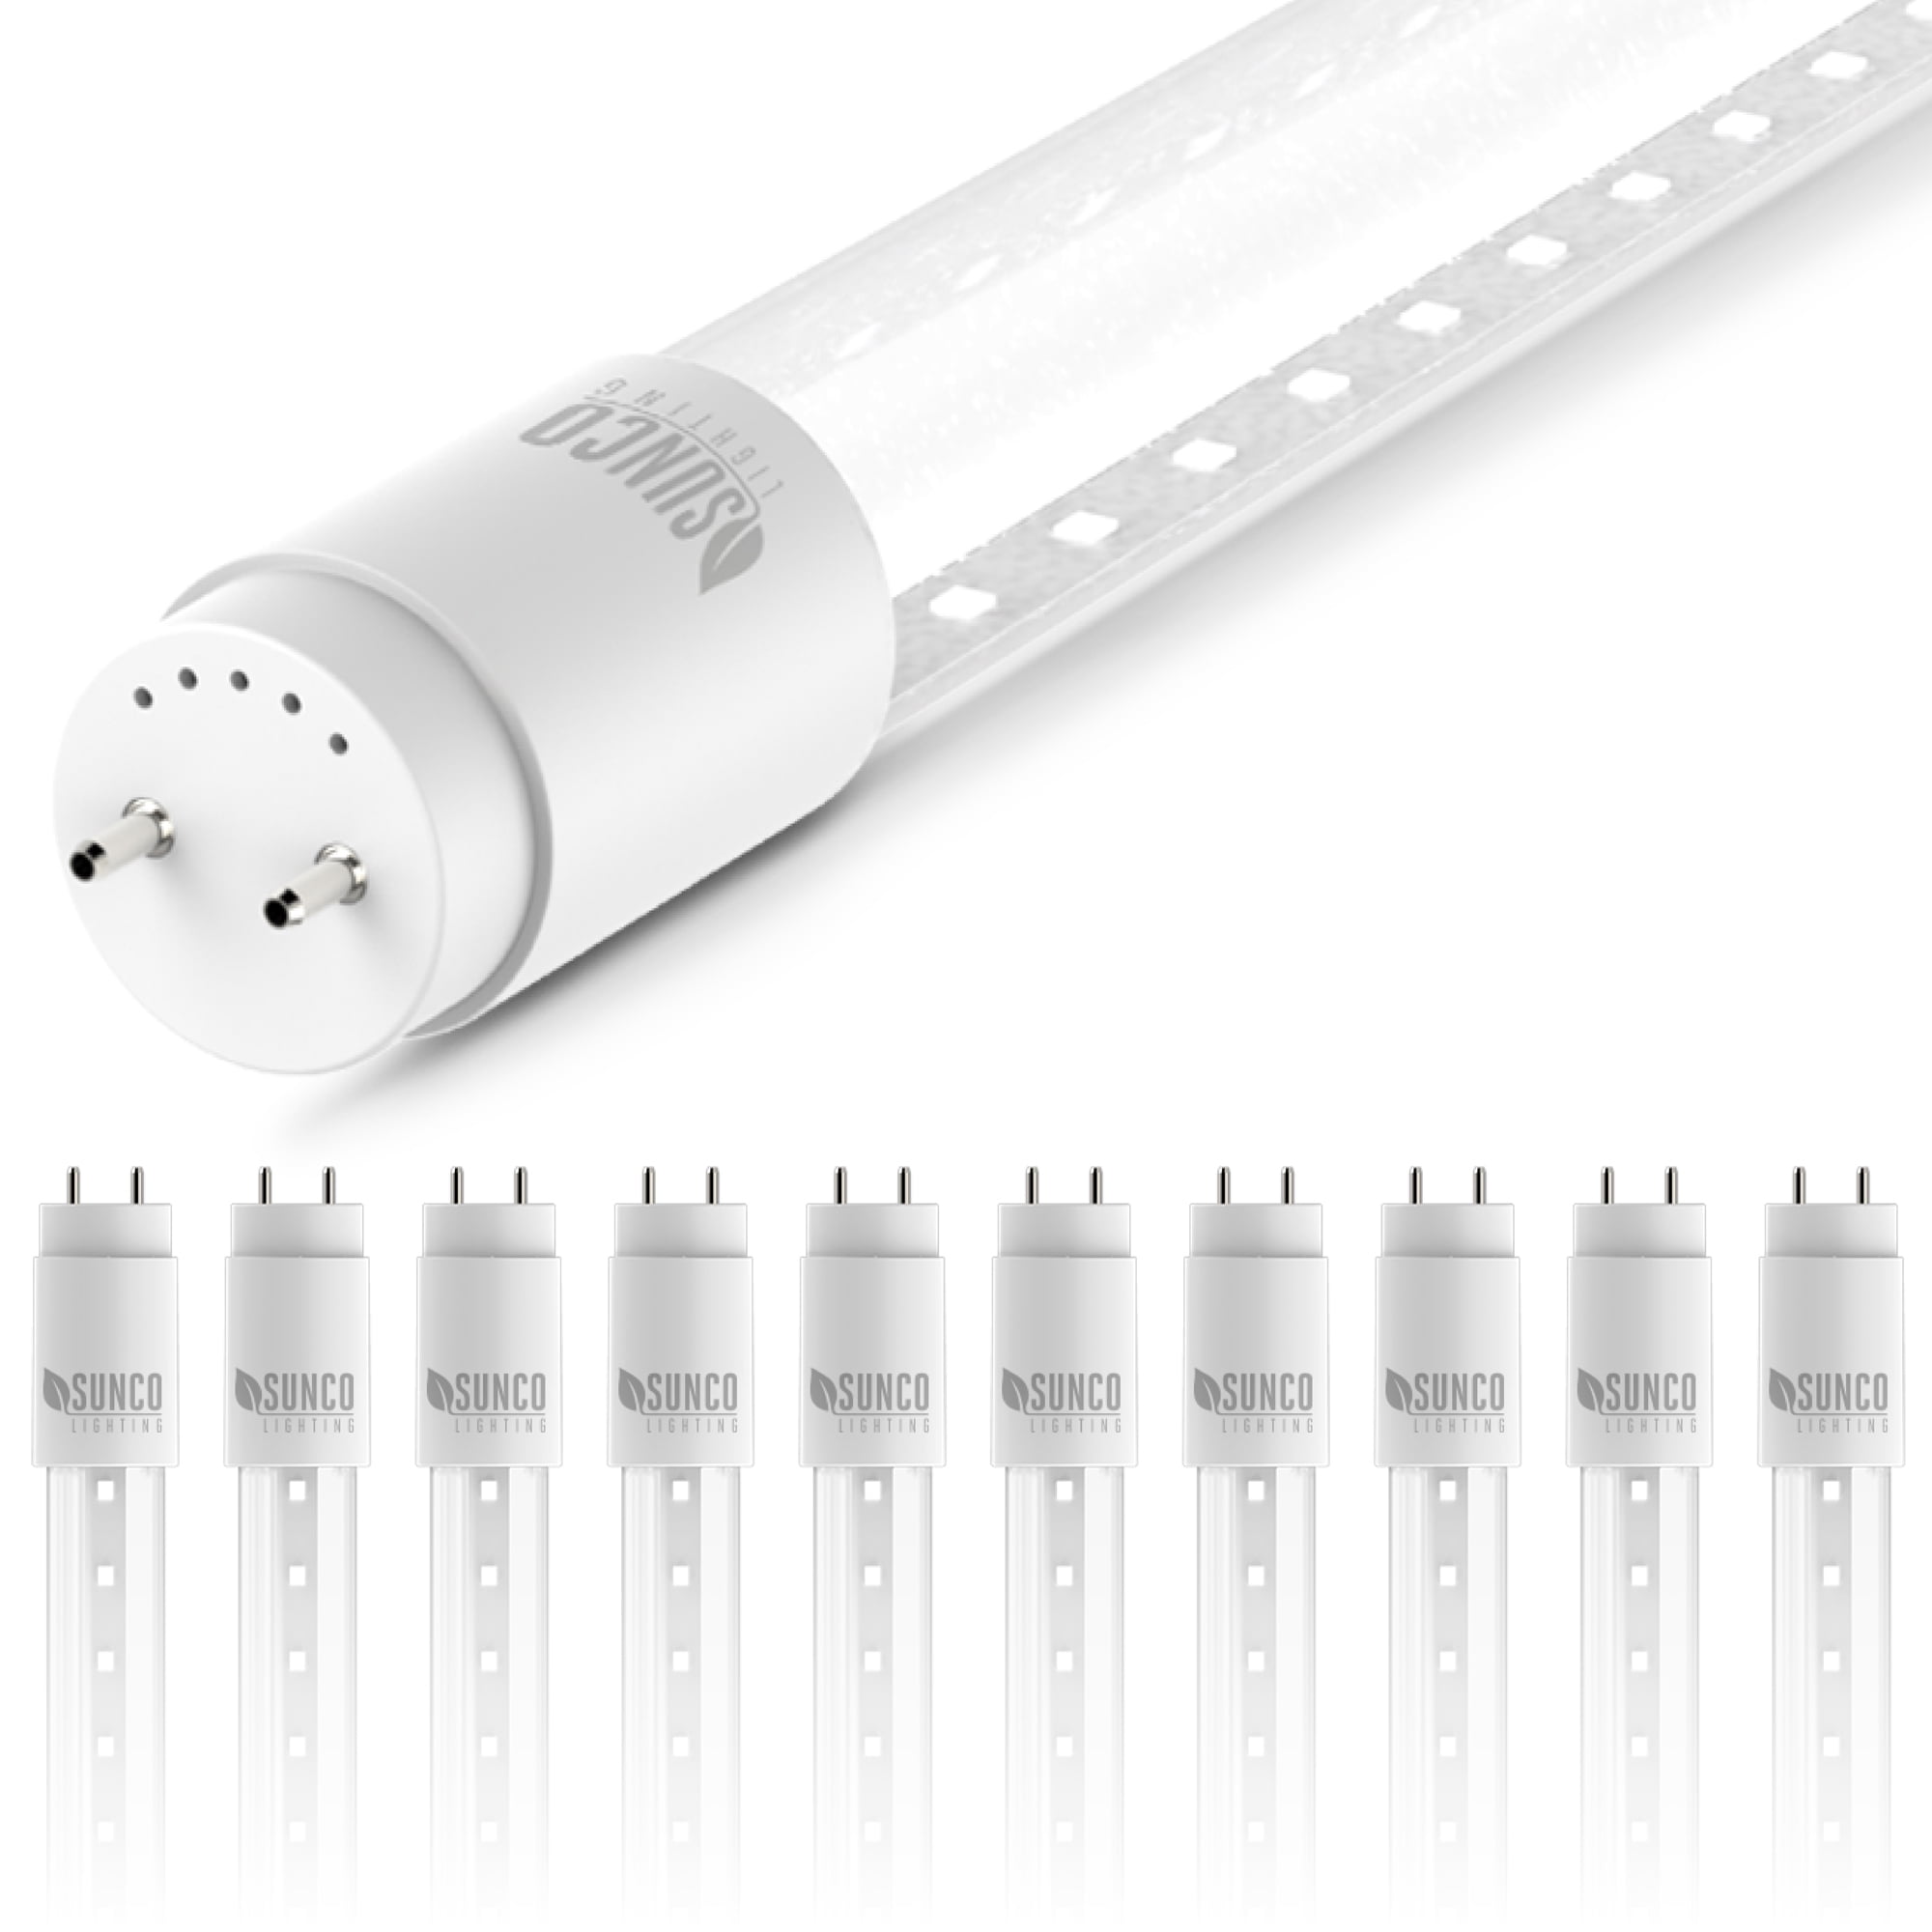 T8 LED Tube 2ft 4ft 5ft Cool White 4000k Ahead BRAND Fluorescent Replacement 